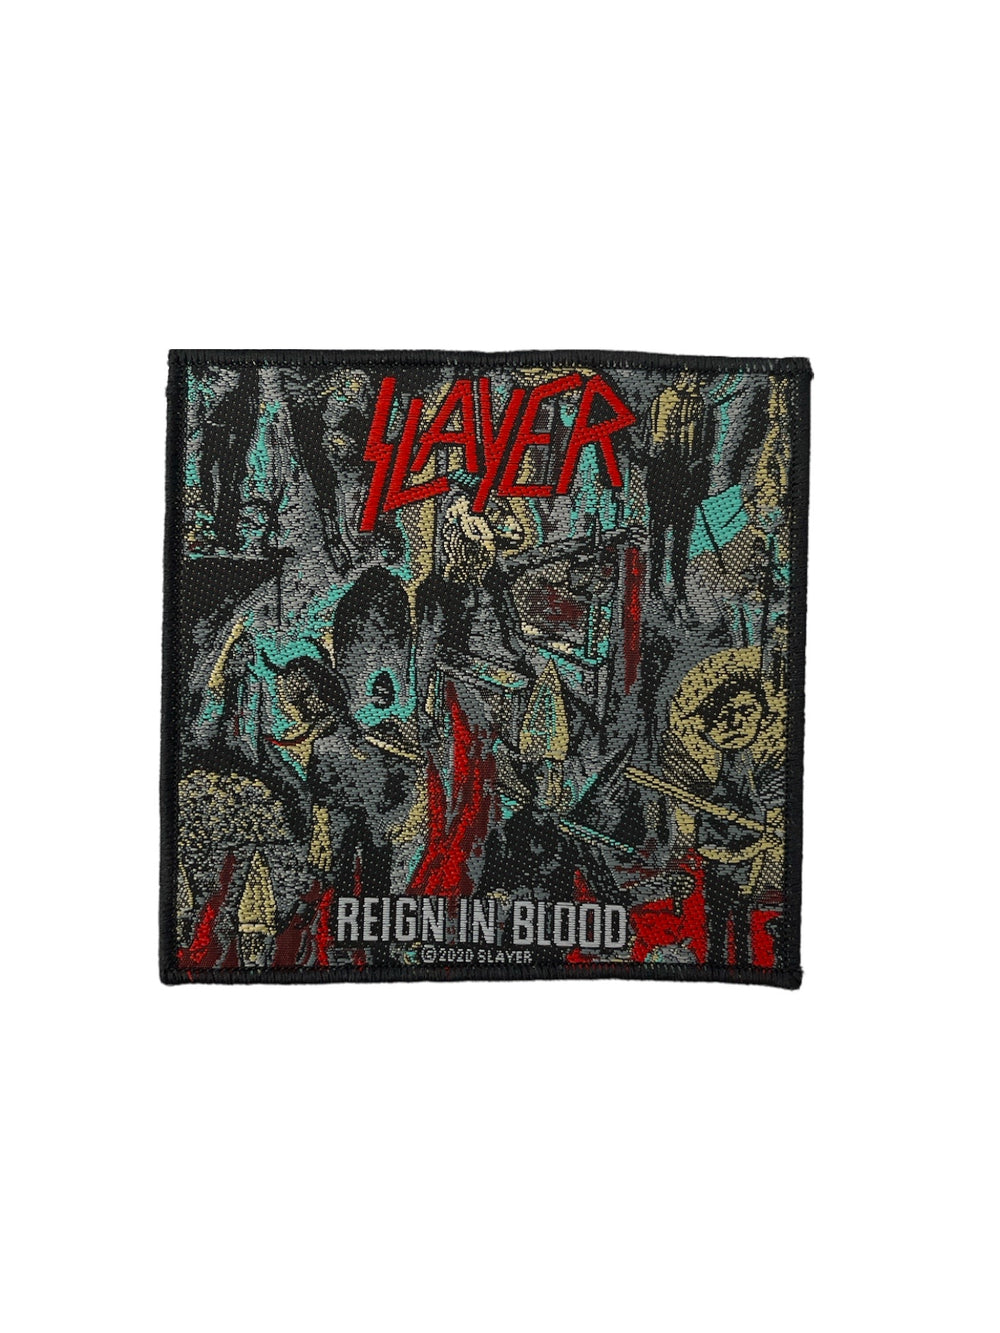 Slayer Reign In Blood Official Woven Patch Brand New